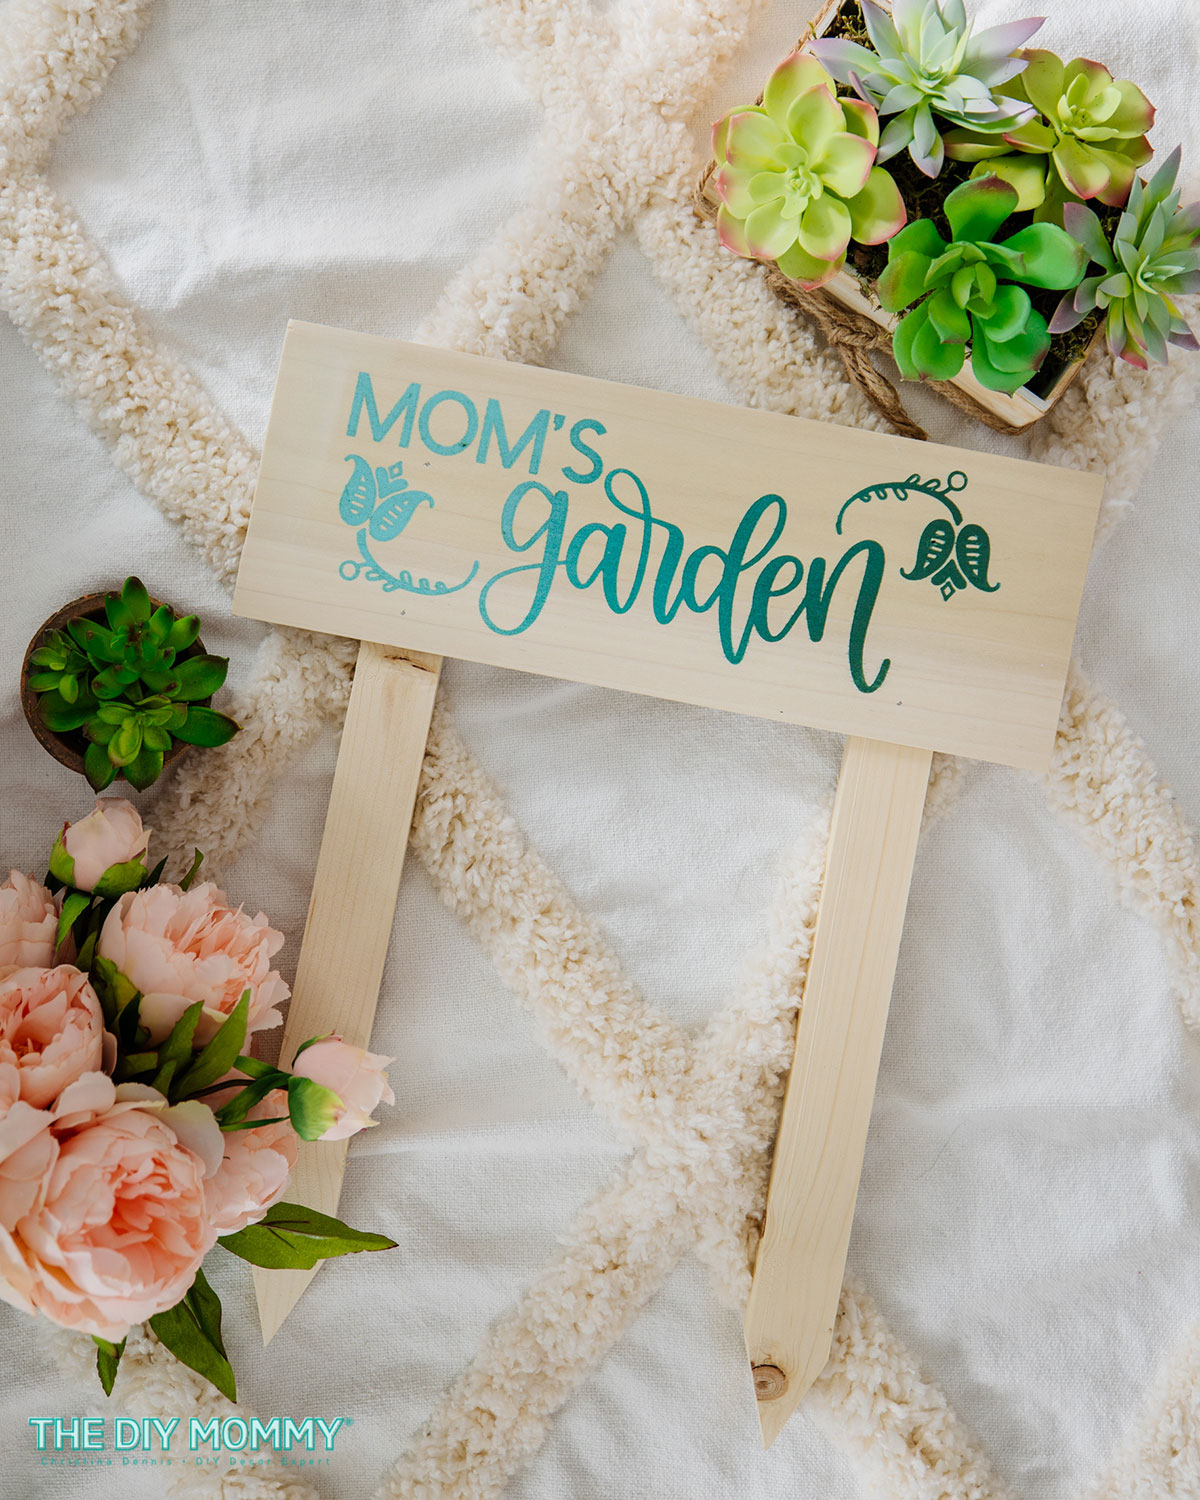 Handcrafted Garden Gifts Made Easy with Cricut!